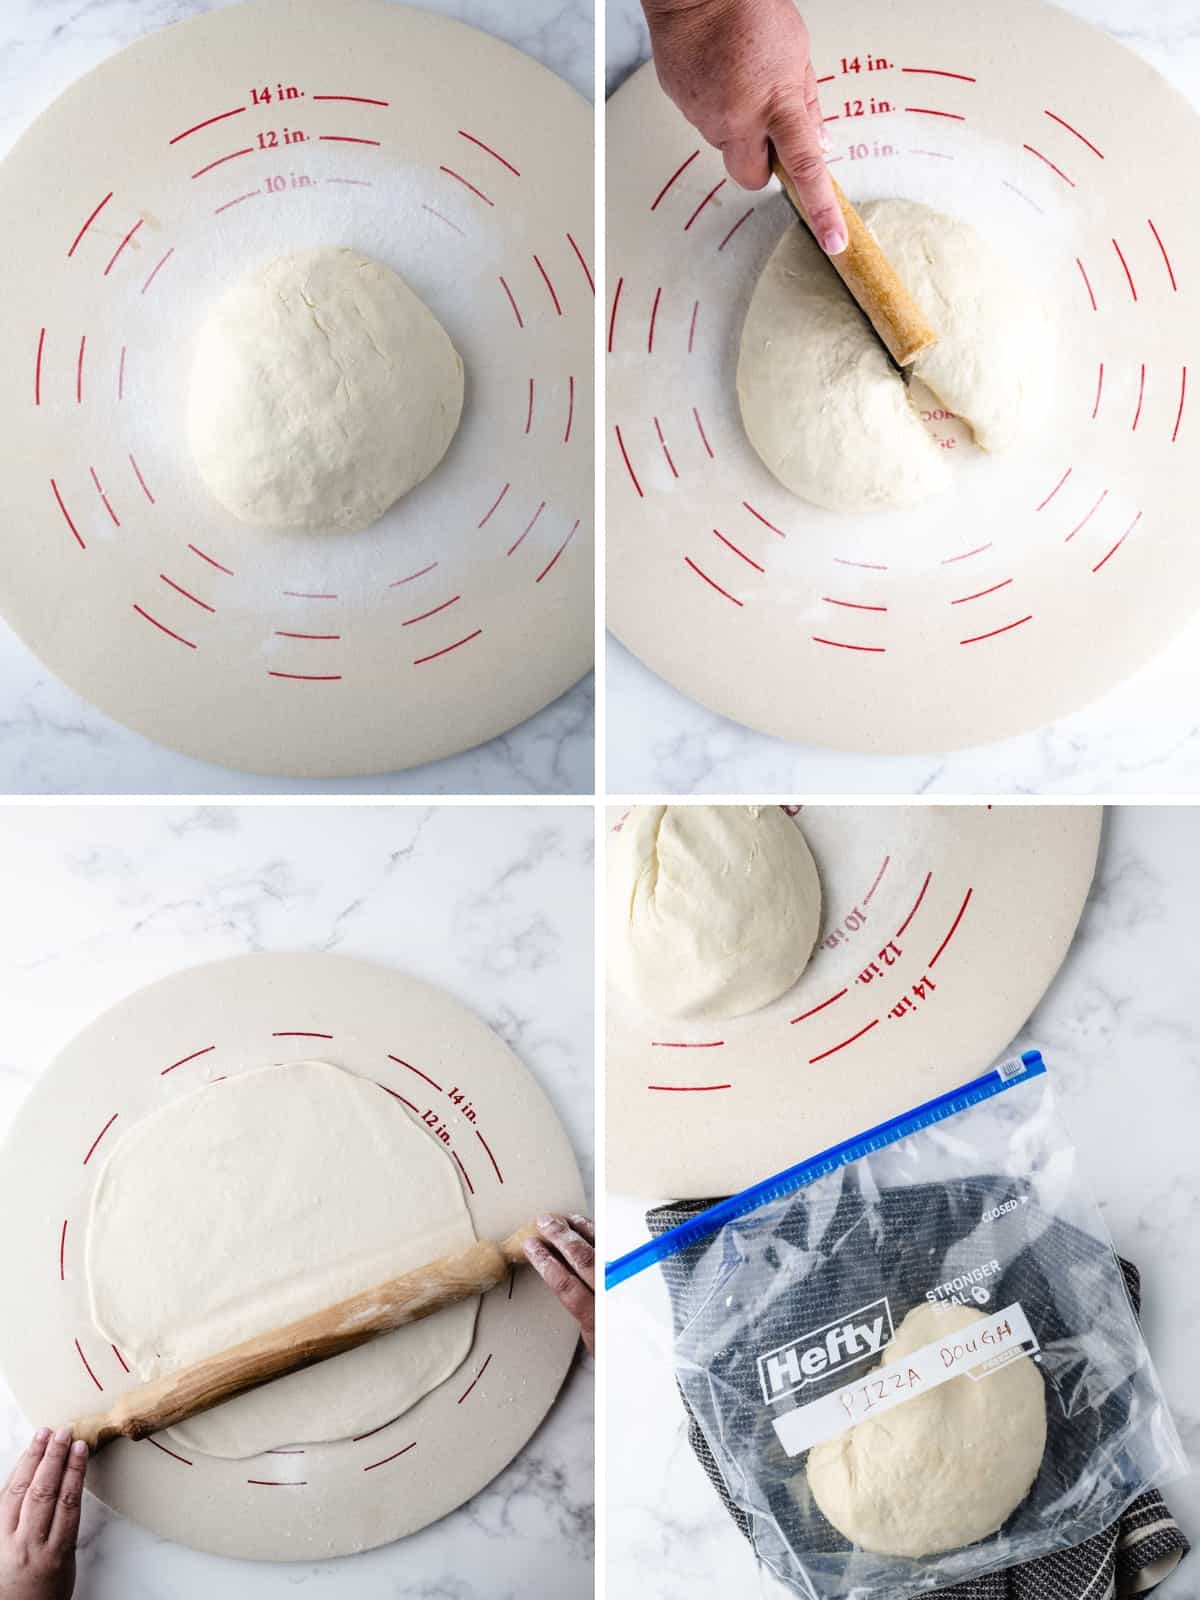 Collage image showing steps to cut the dough ball in half, how to roll it out, and storing on pizza dough in an oiled plastic freezer bag to freezer for later use.